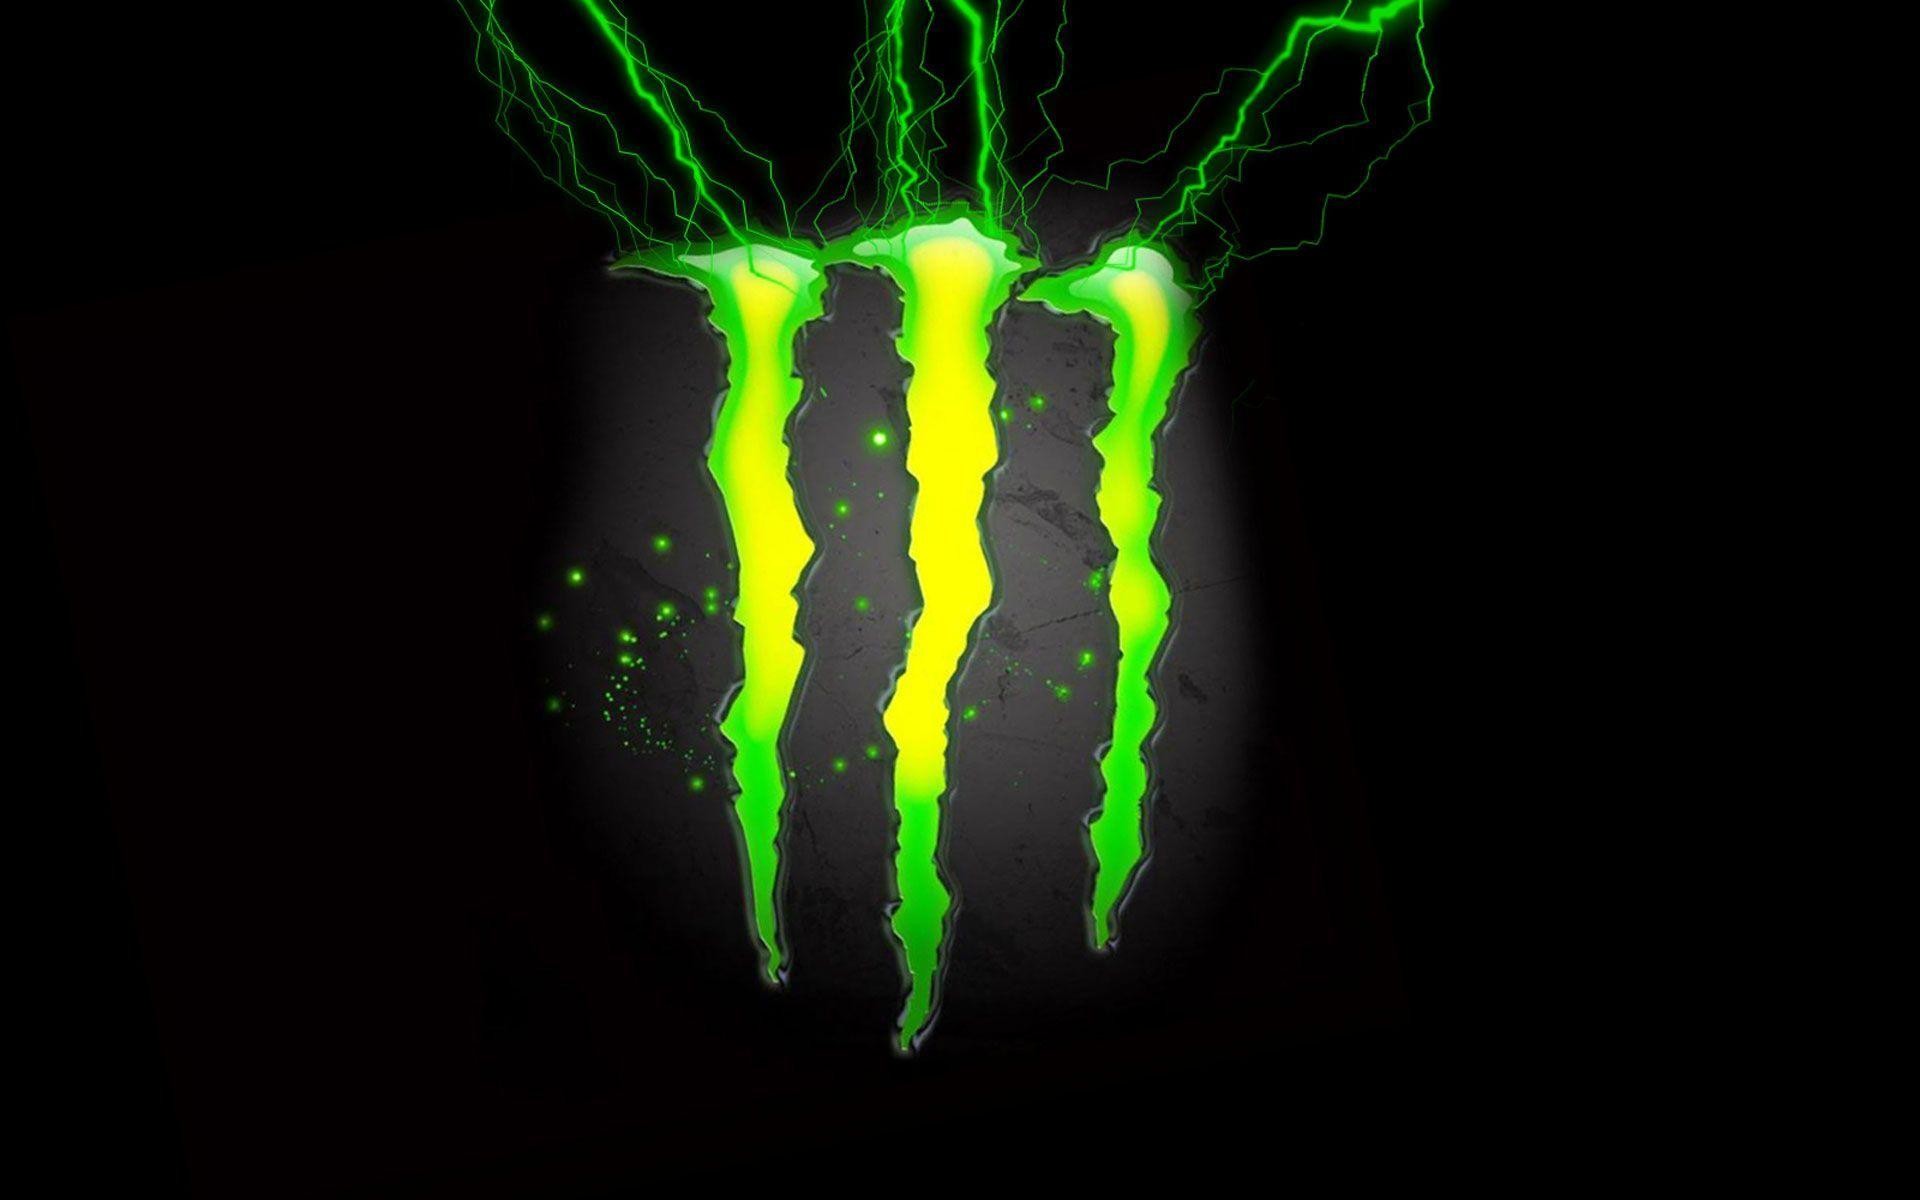 Monster Energy Wallpaper Hd 2018 76 Pictures - 4210 wallpapers monster girls energy 1920x1080 1 roblox